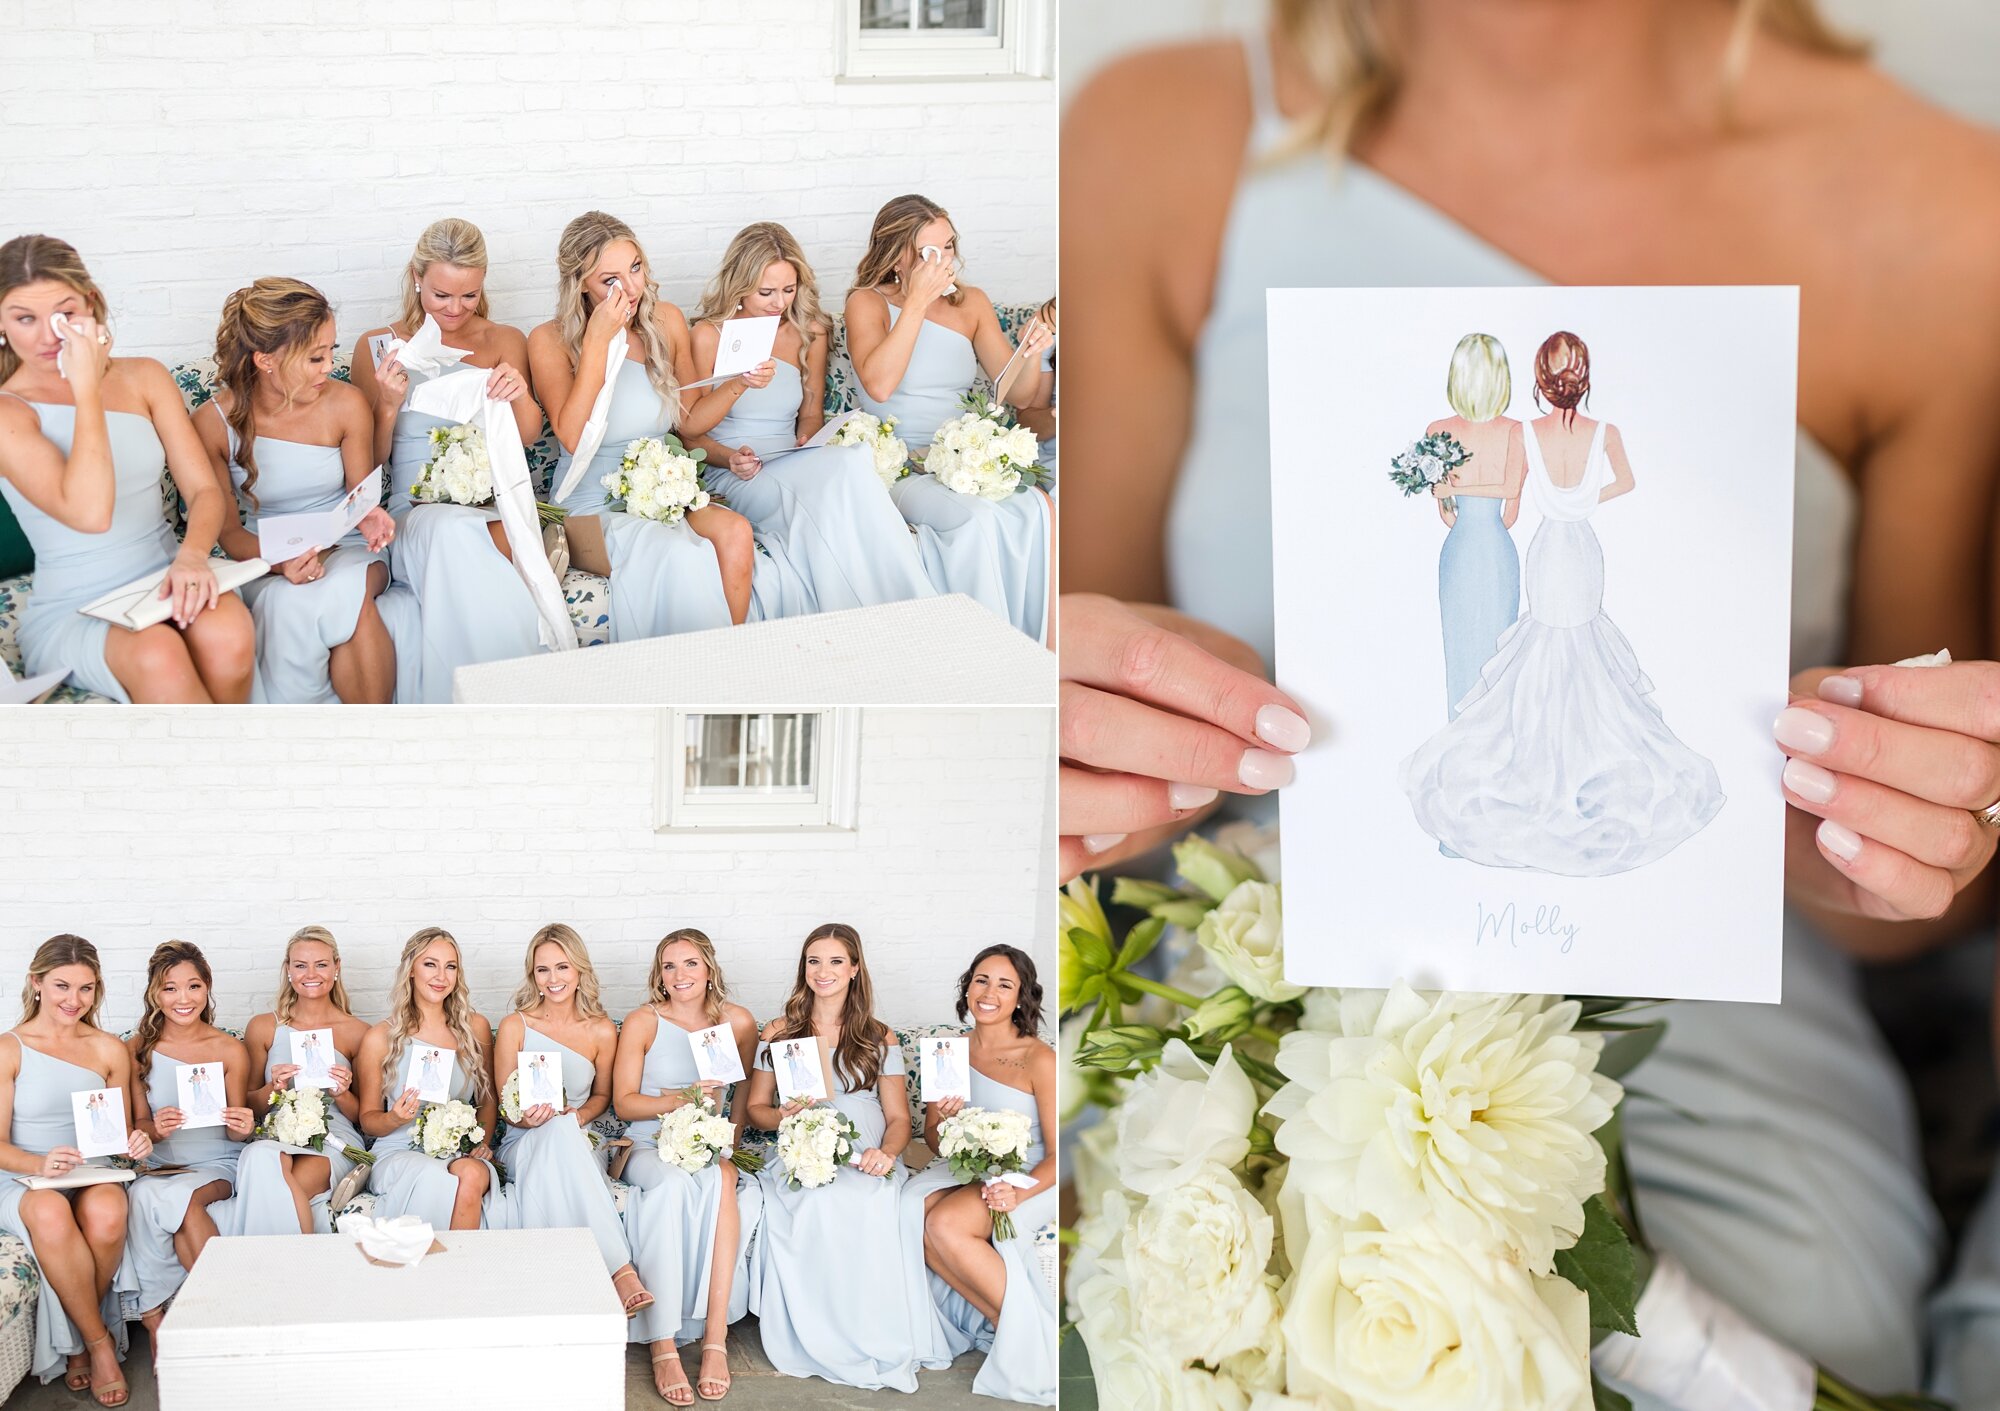  Caroline had cards customized for each bridesmaid. What a unique and thoughtful idea! 